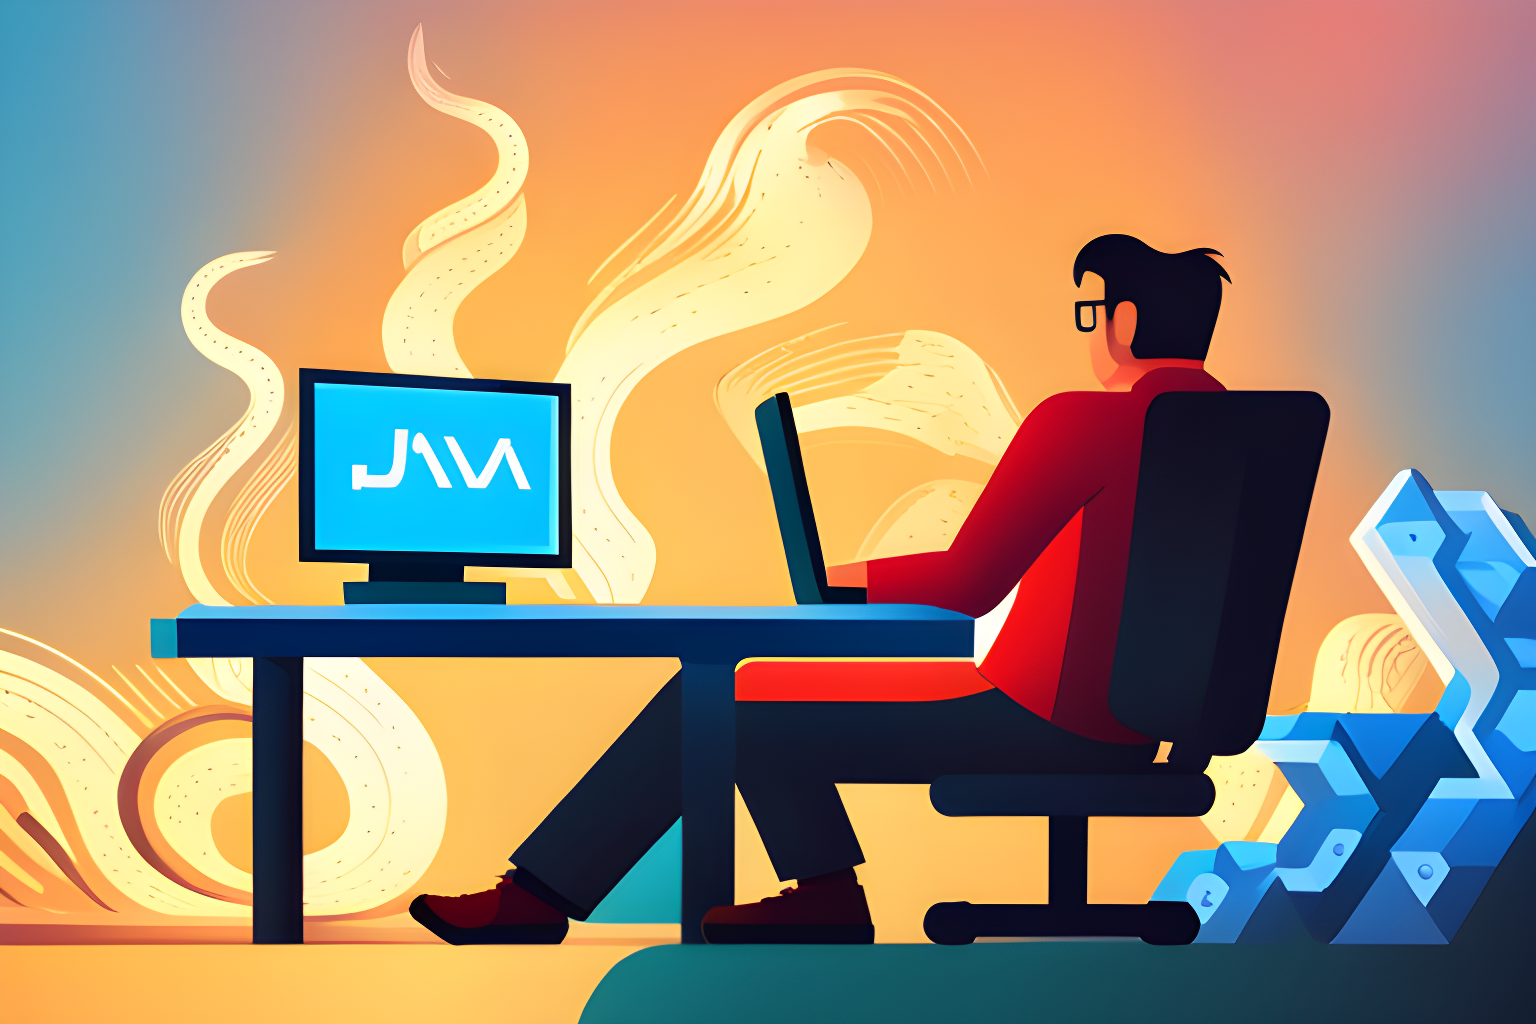 Hire Java Developer: What to Start with